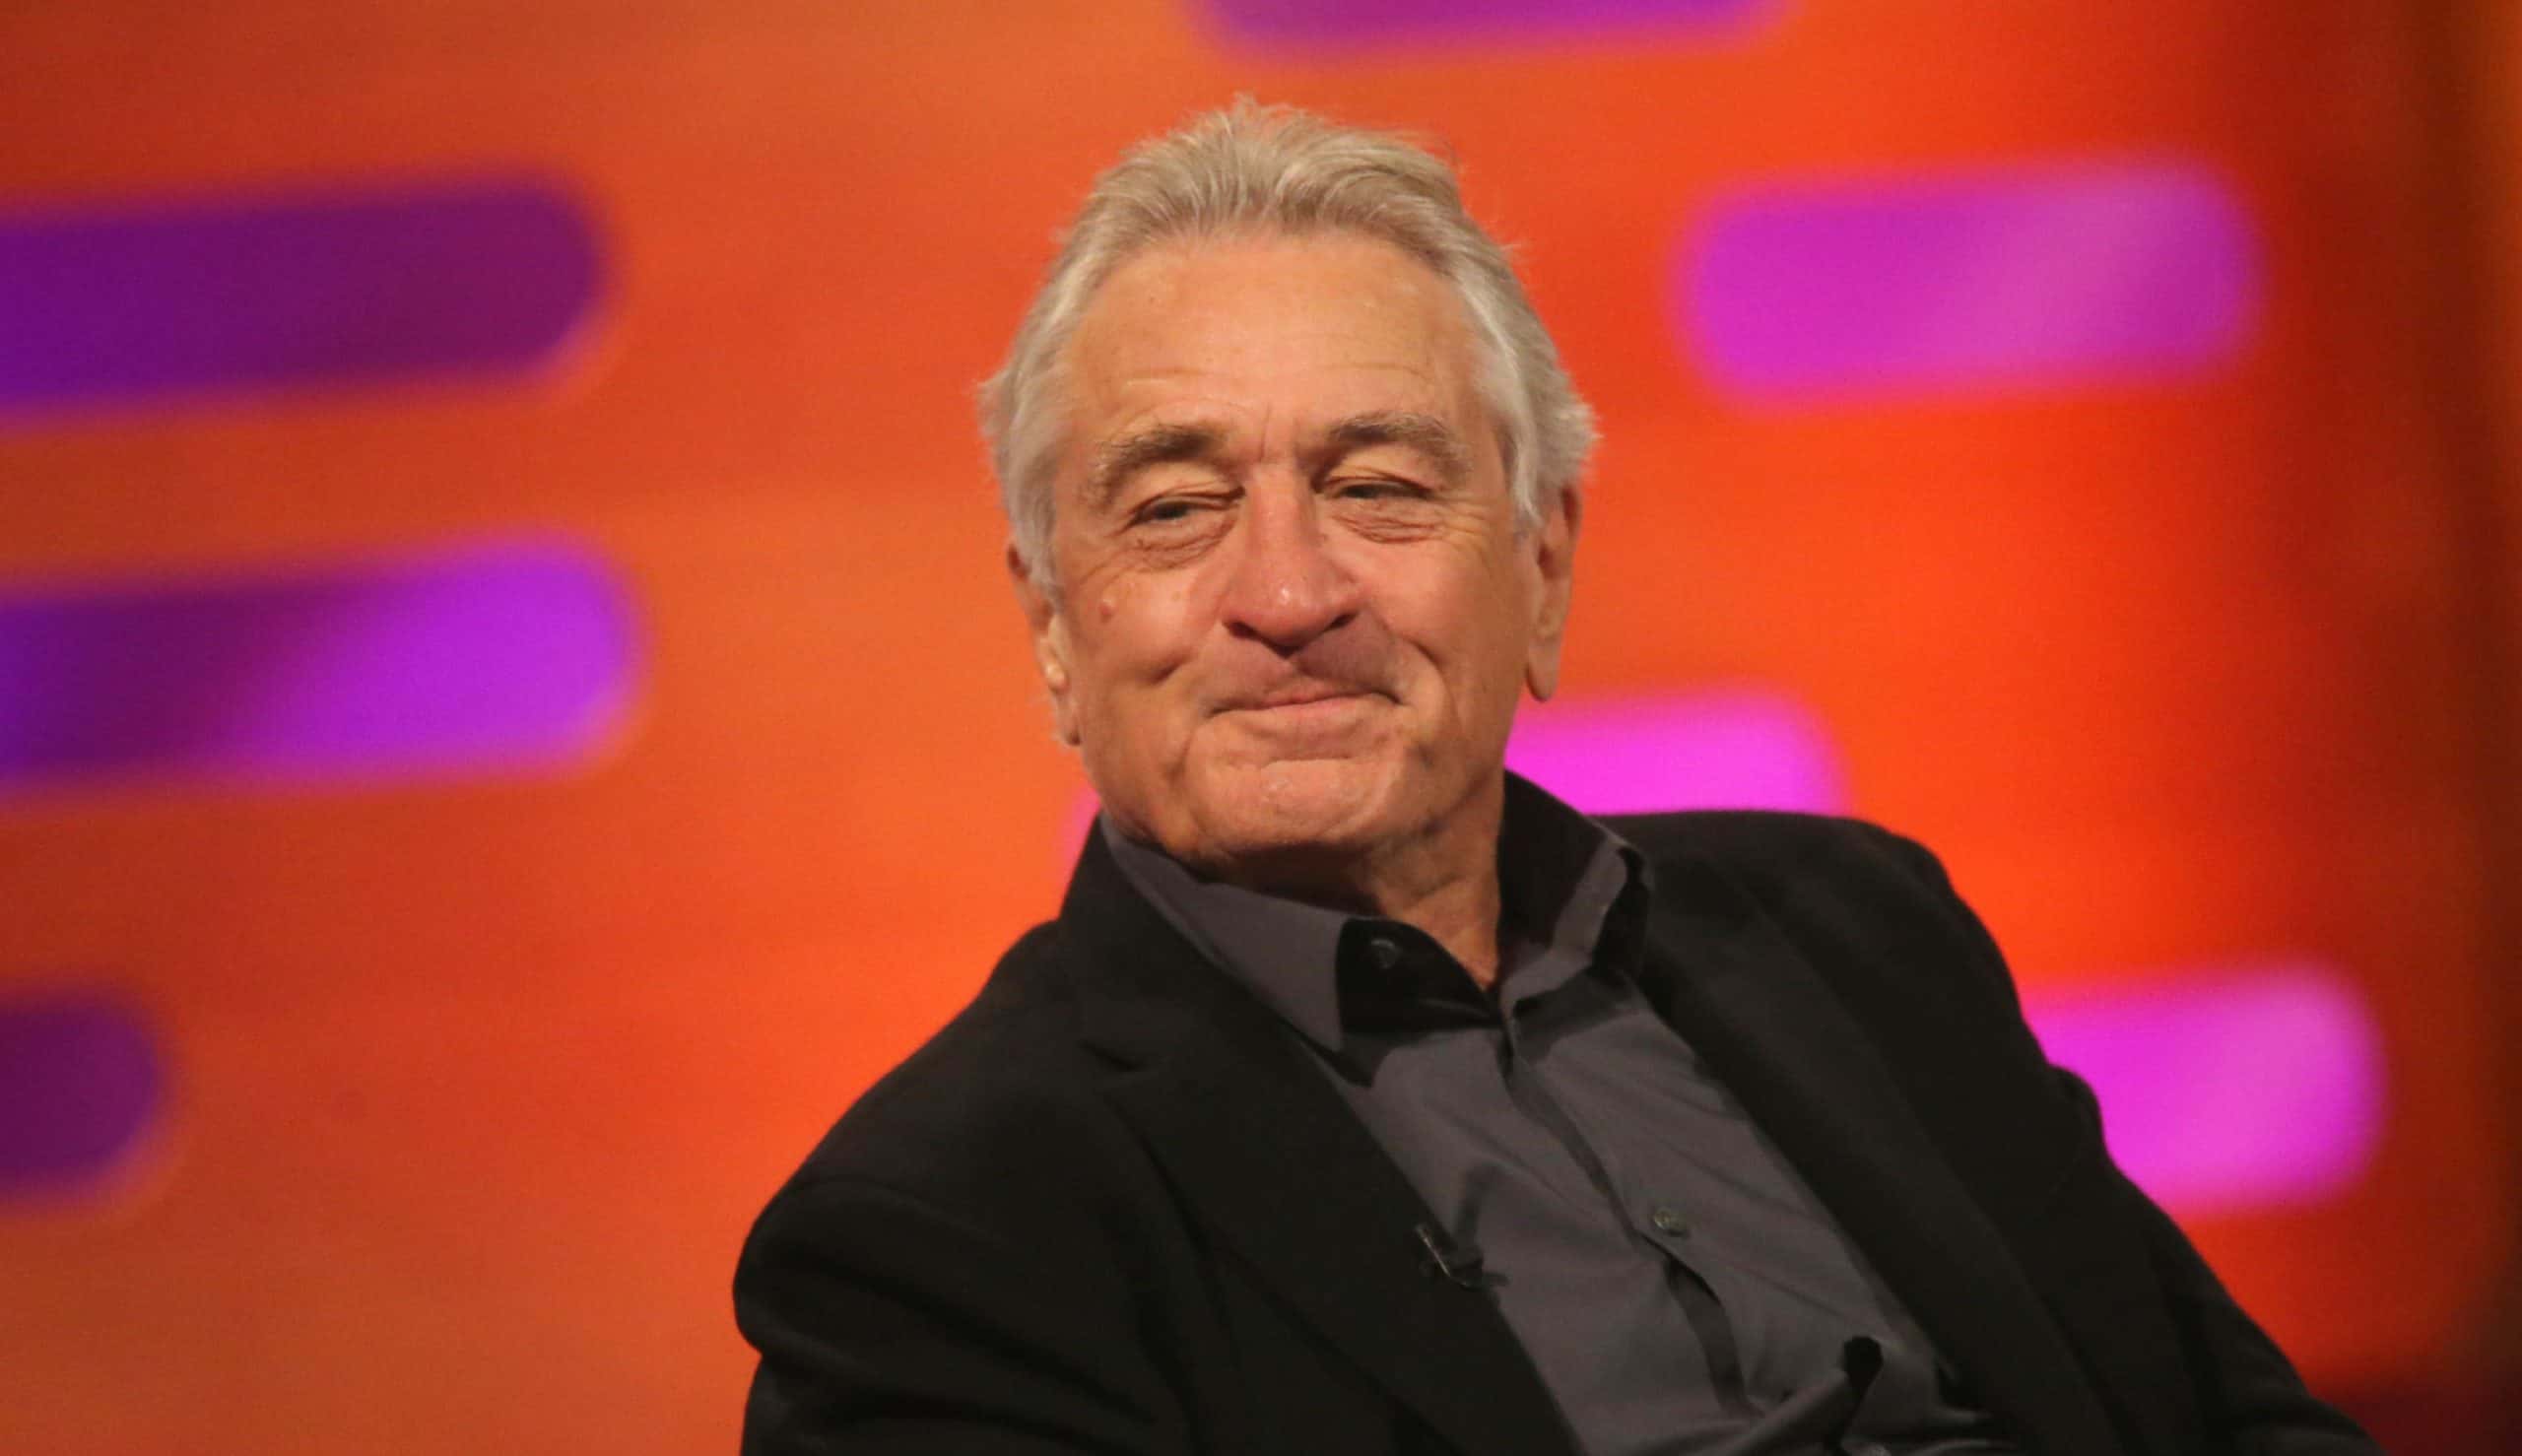 ‘We have to do something’: Robert De Niro calls out Russia invasion